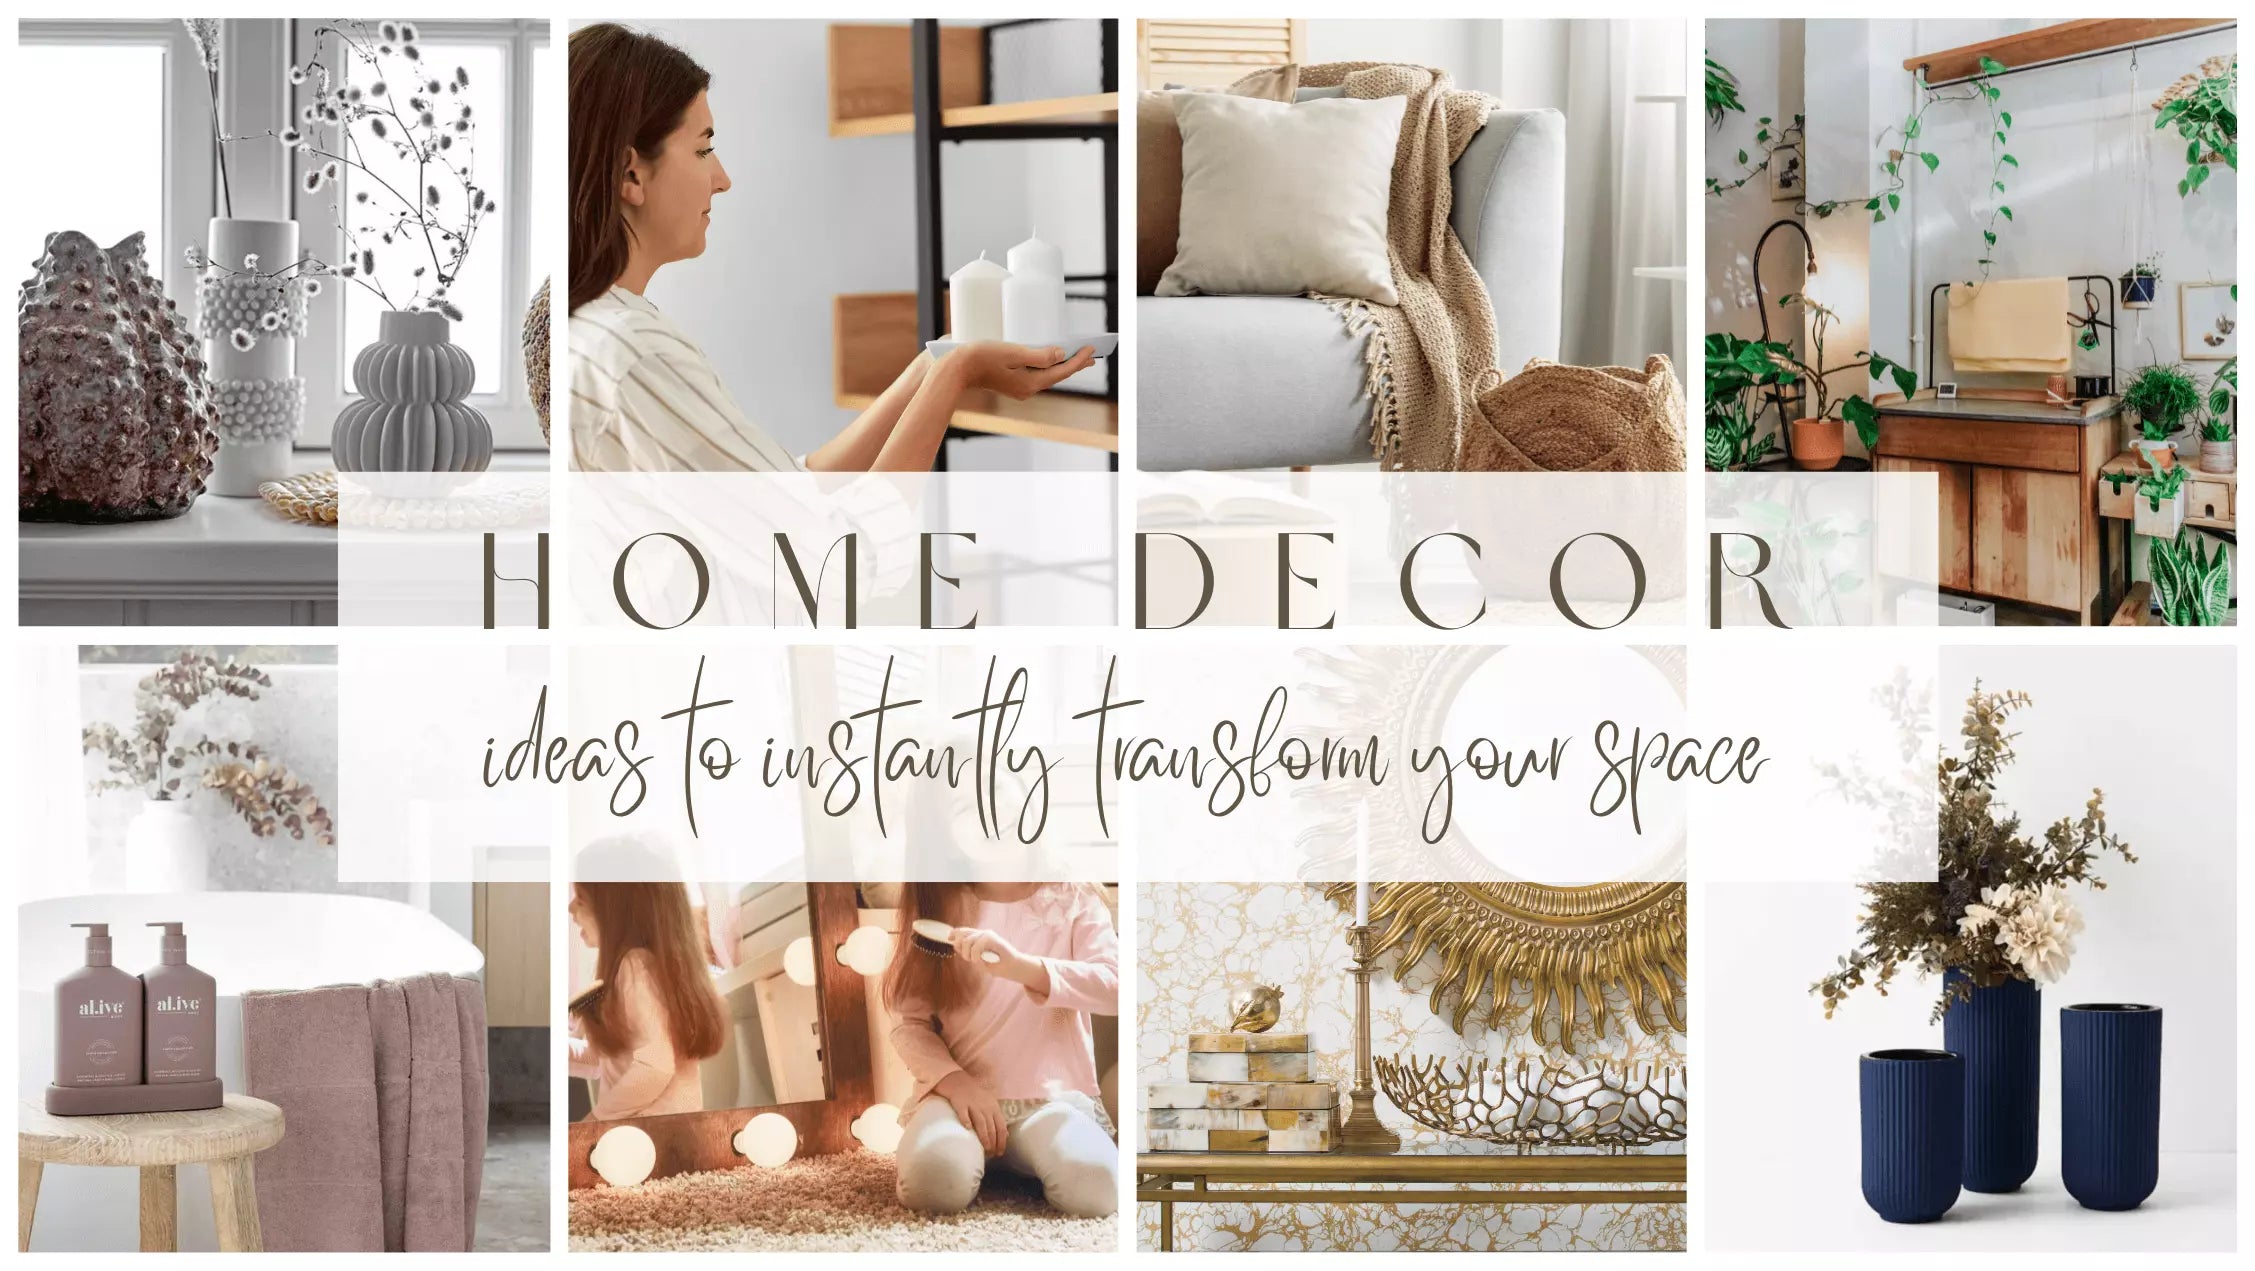 Home Decor Ideas to instantly transform your space